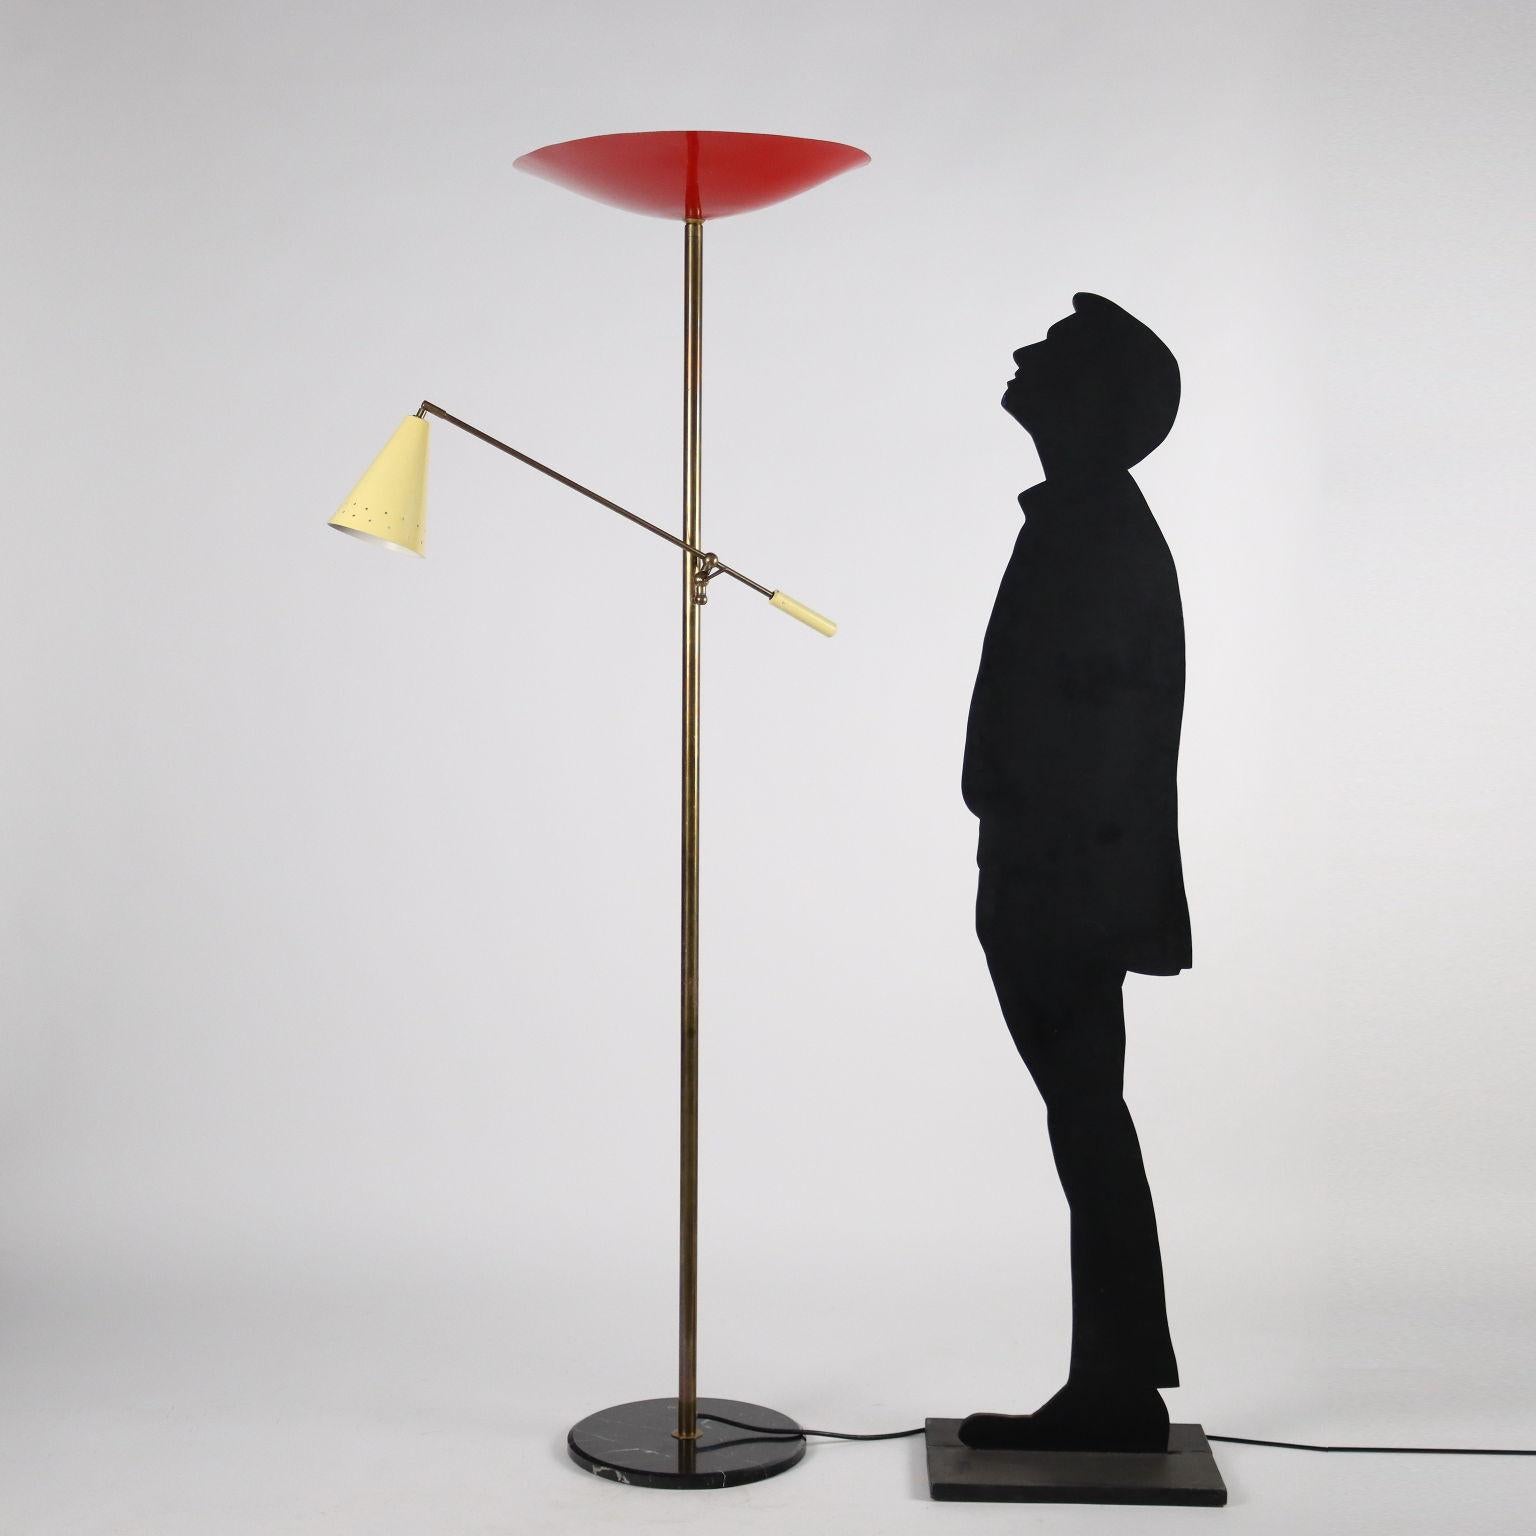 Floor lamp in the style of Gino Sarfatti with marble base, brass stem, arm with adjustable joint, lampshades in enamelled aluminum.